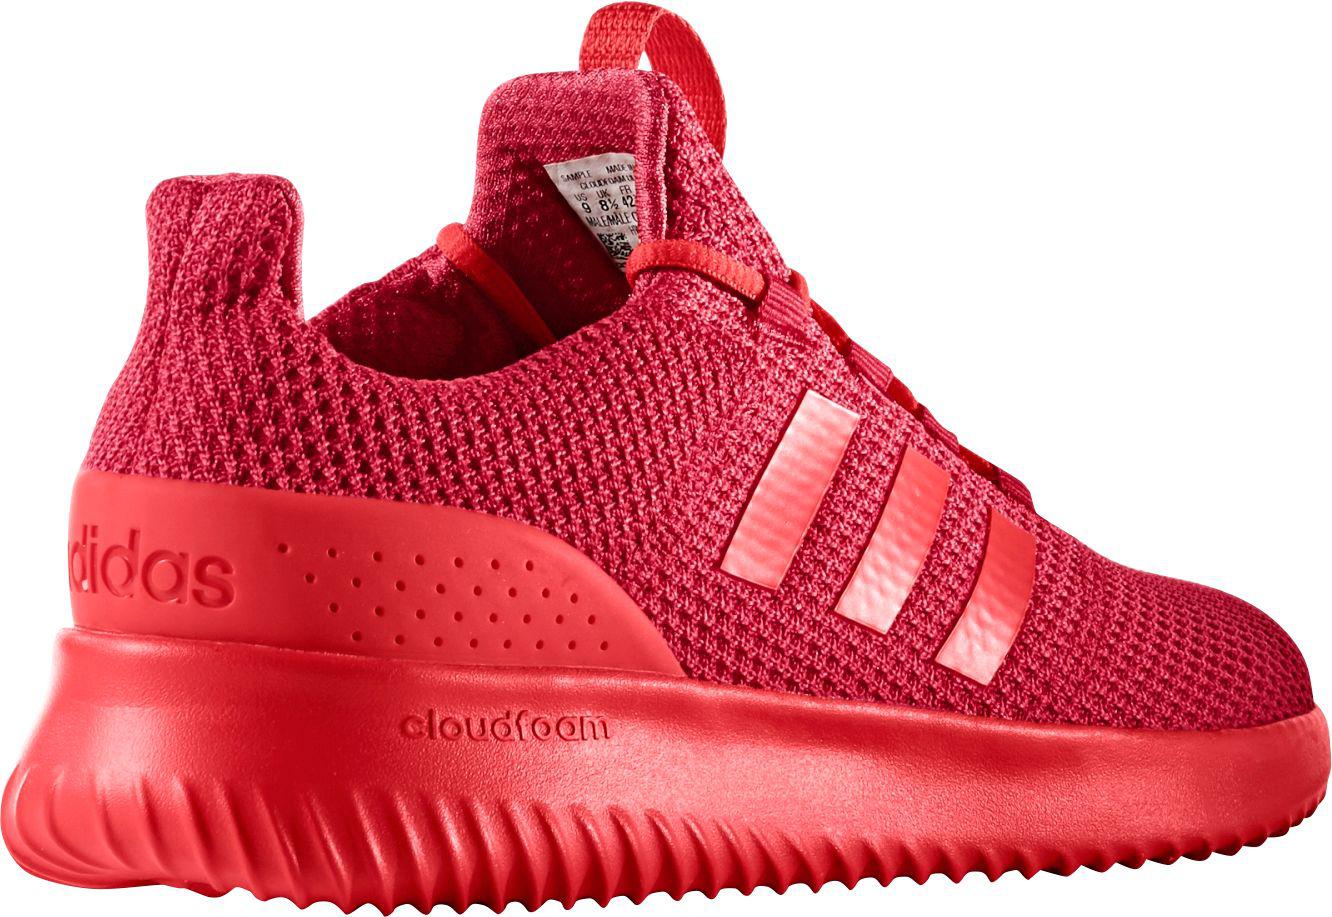 red adidas cloudfoam shoes cheap online